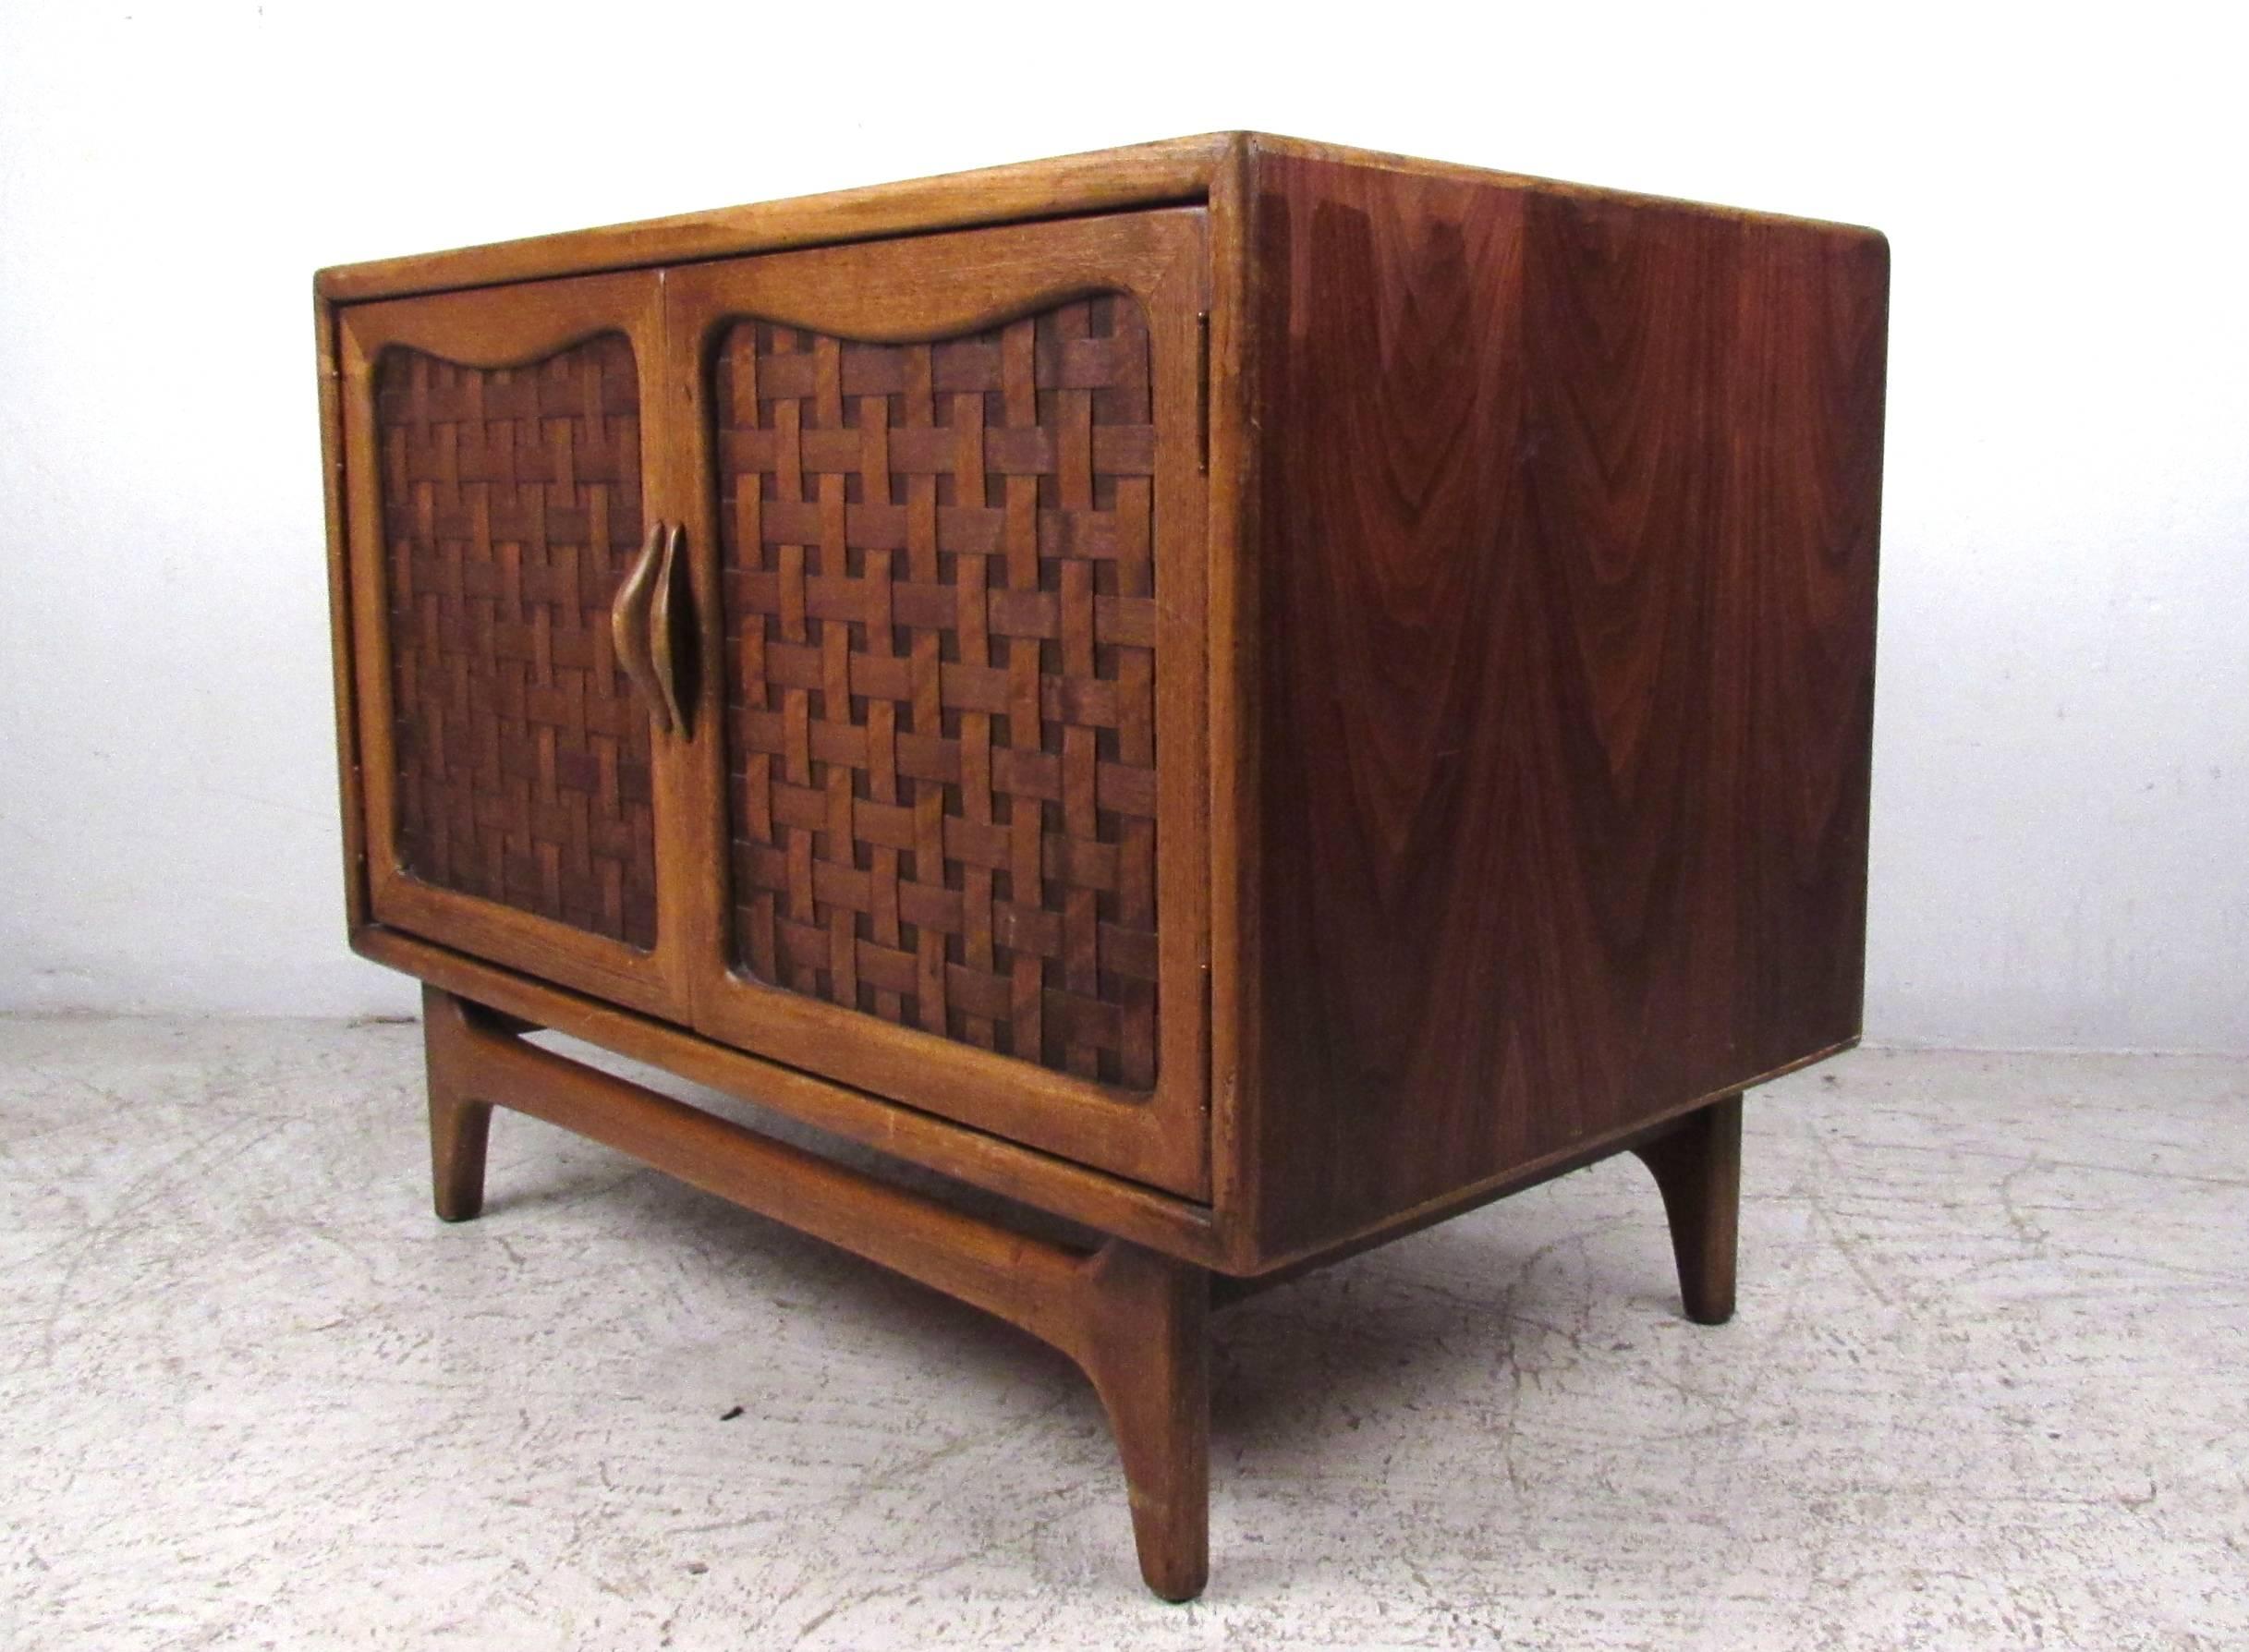 This vintage walnut cabinet by Lane makes a unique storage piece for home office. Ample open storage space, basket weave cabinet doors, and quality vintage Lane Furniture construction make this a wonderful addition to any interior. Please confirm